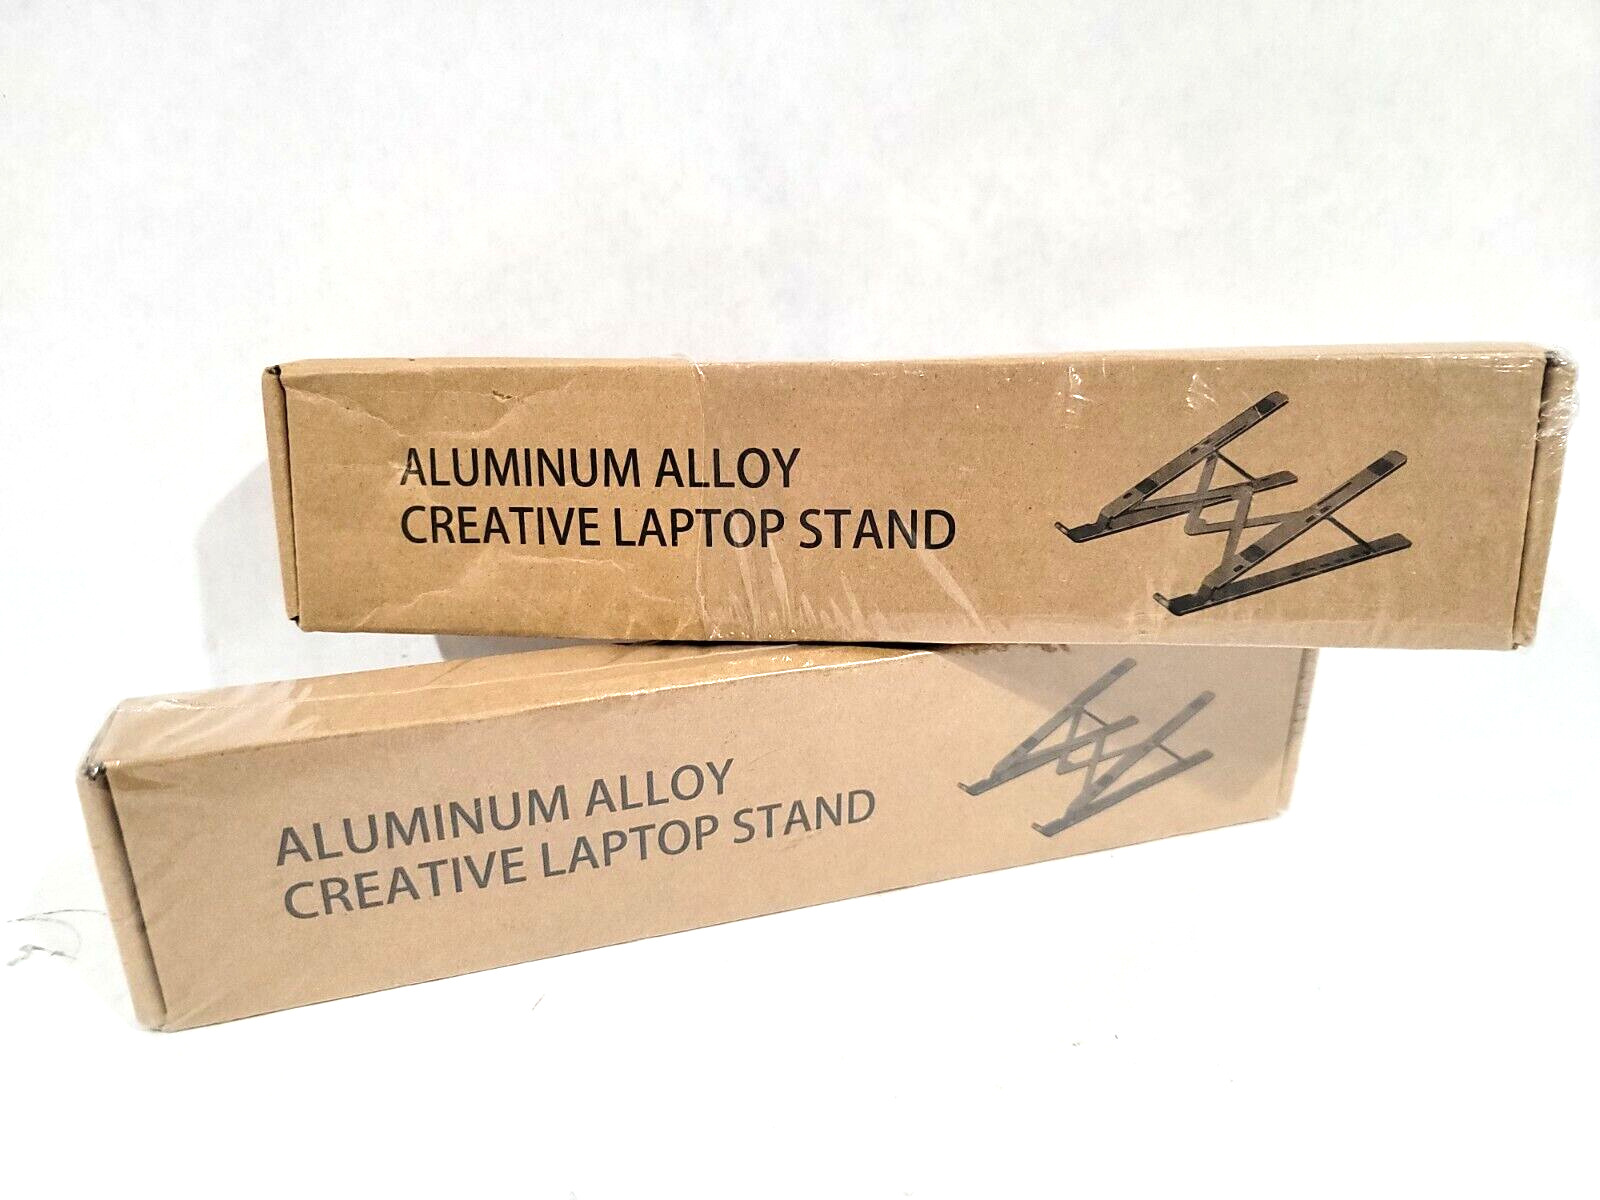 Lot of 2 ALUMINUM ALLOY CREATIVE LAPTOP STAND (silver)